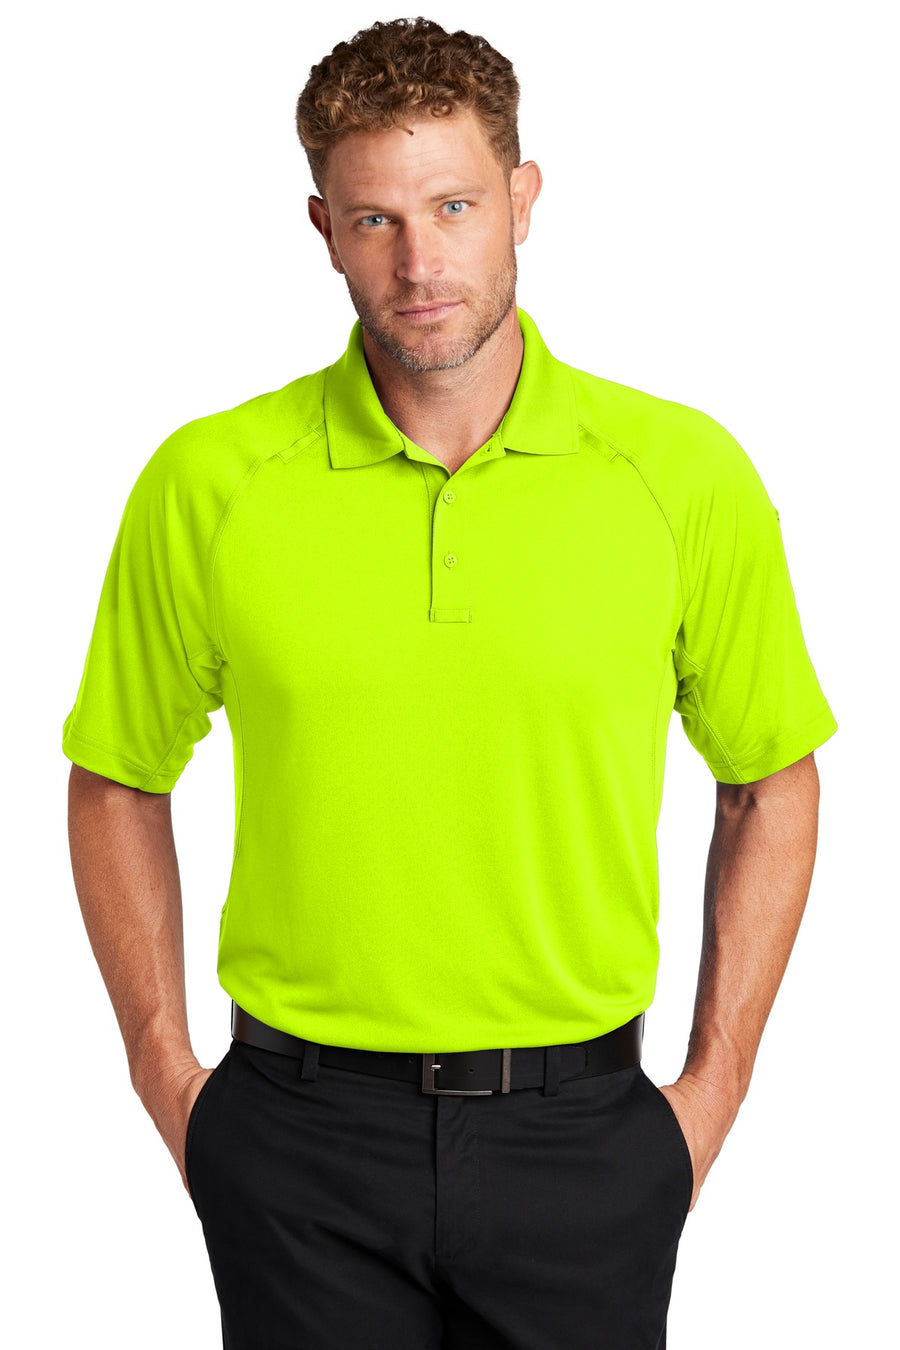 CornerStone Select Lightweight Snag-Proof Tactical Polo.